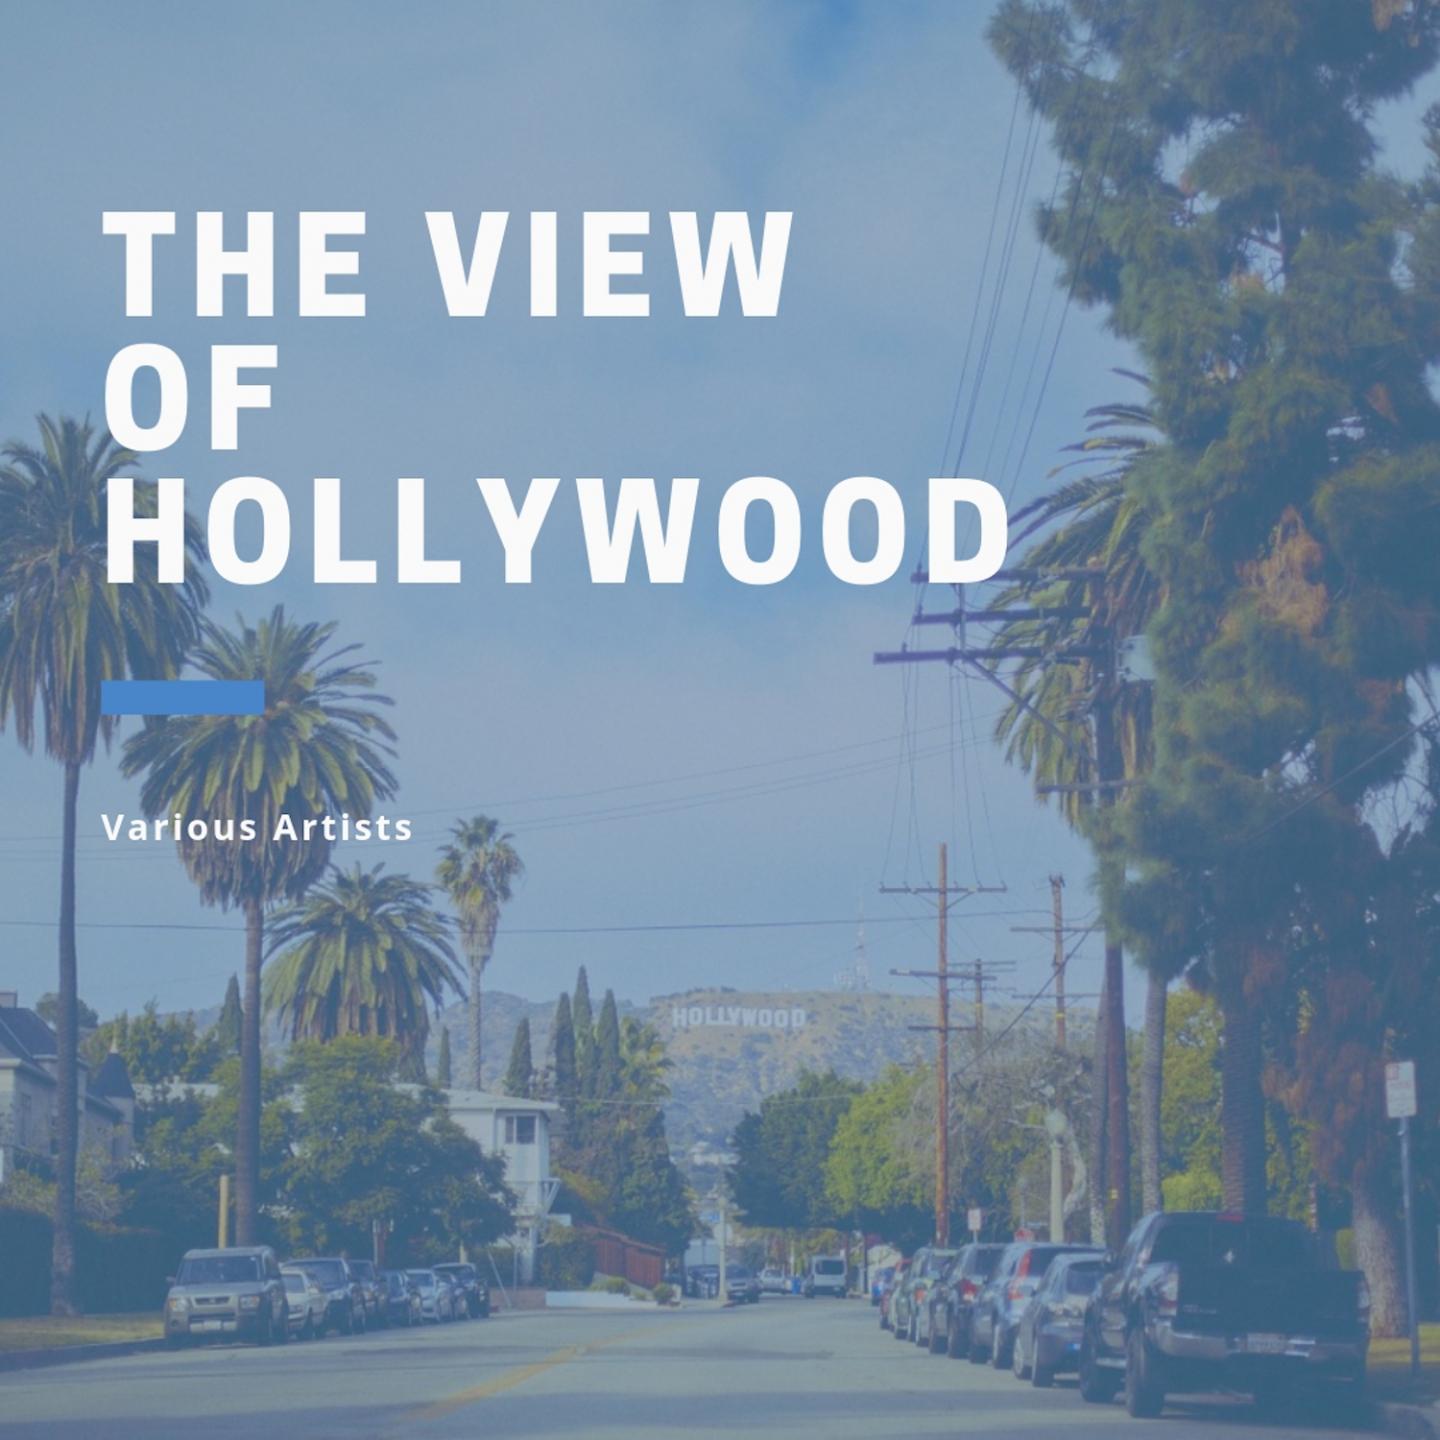 The View of Hollywood